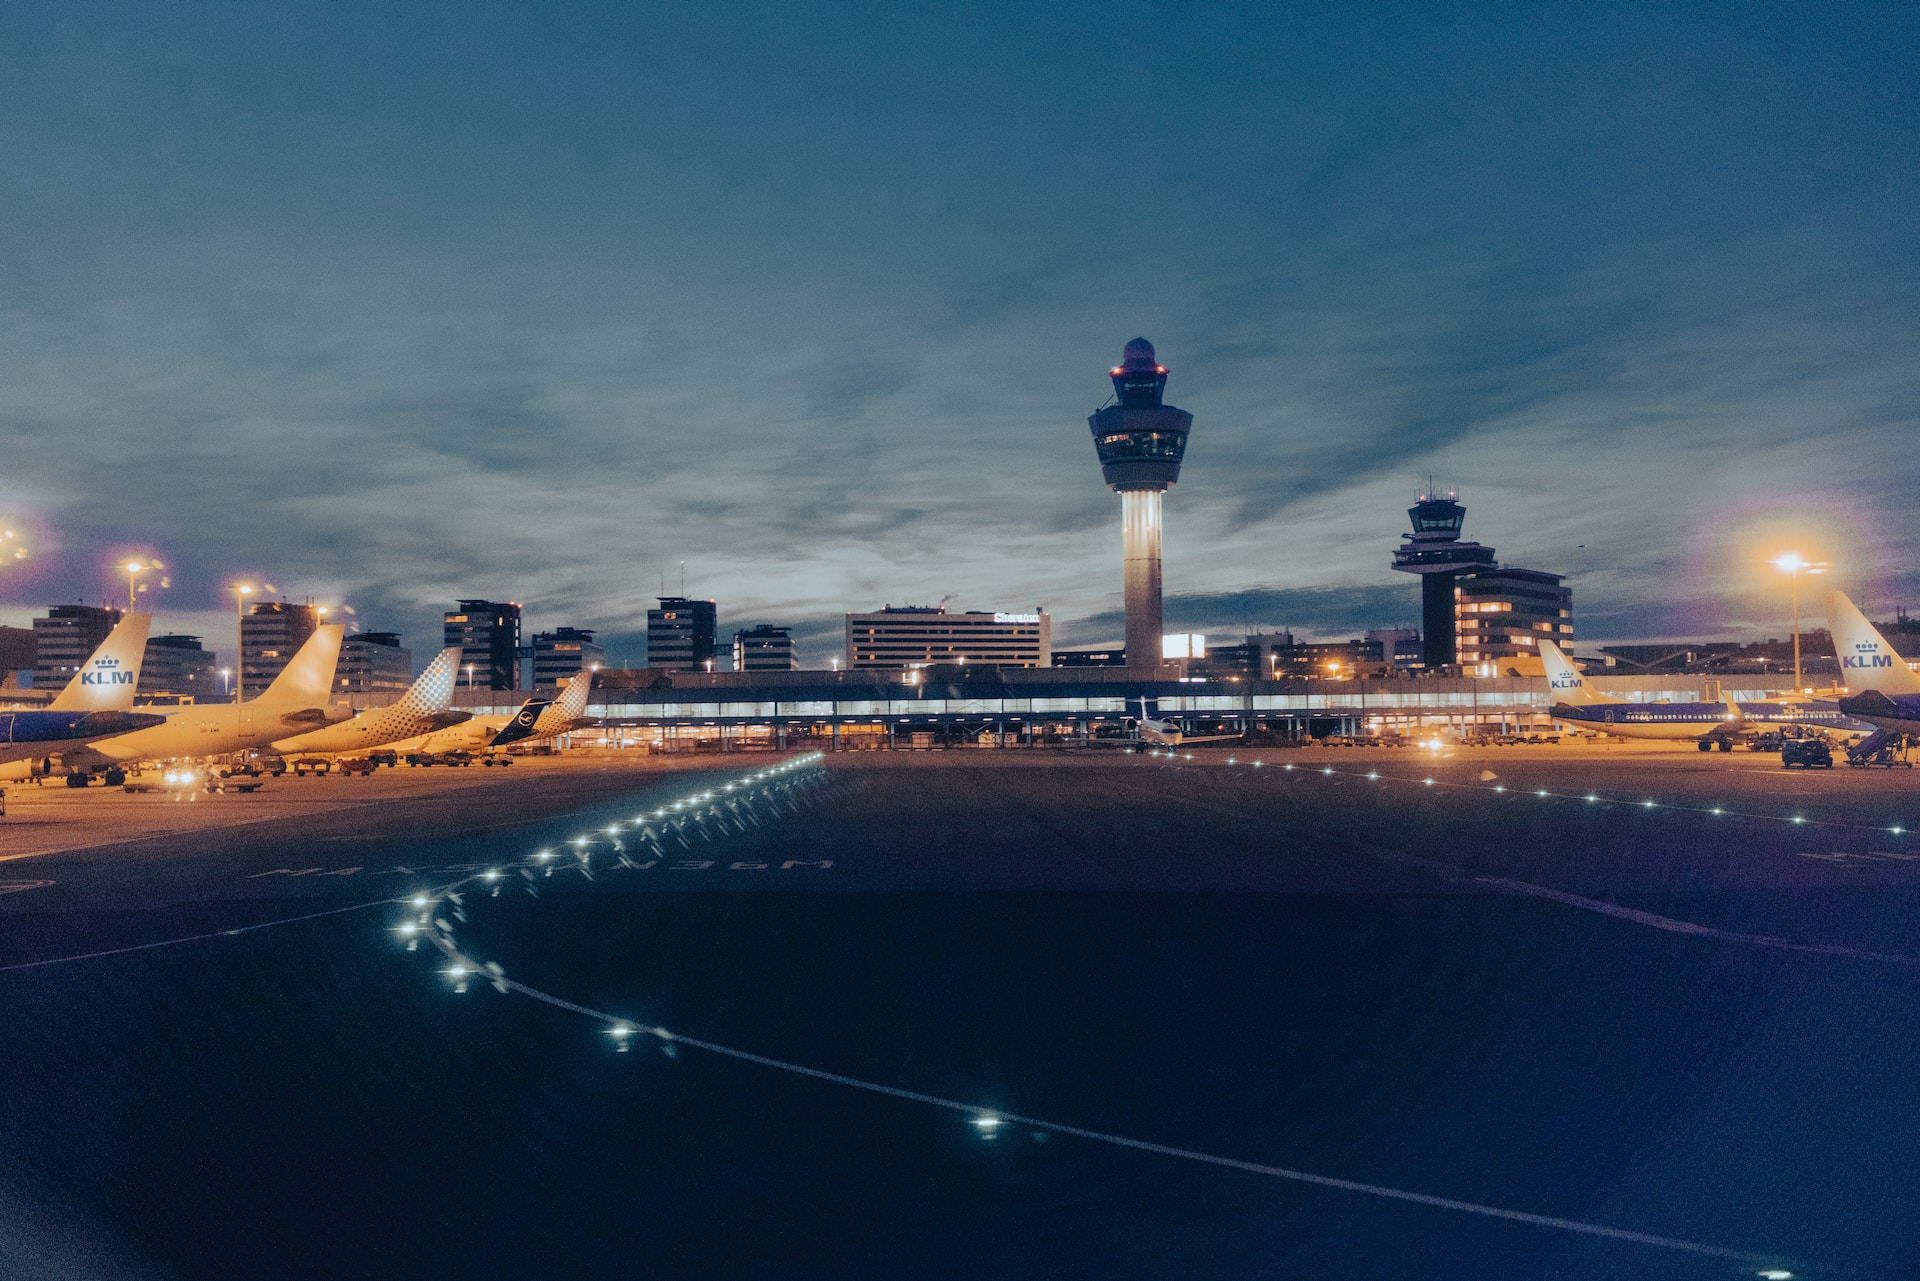 Amsterdam's Schiphol Airport is capping passengers and flights.